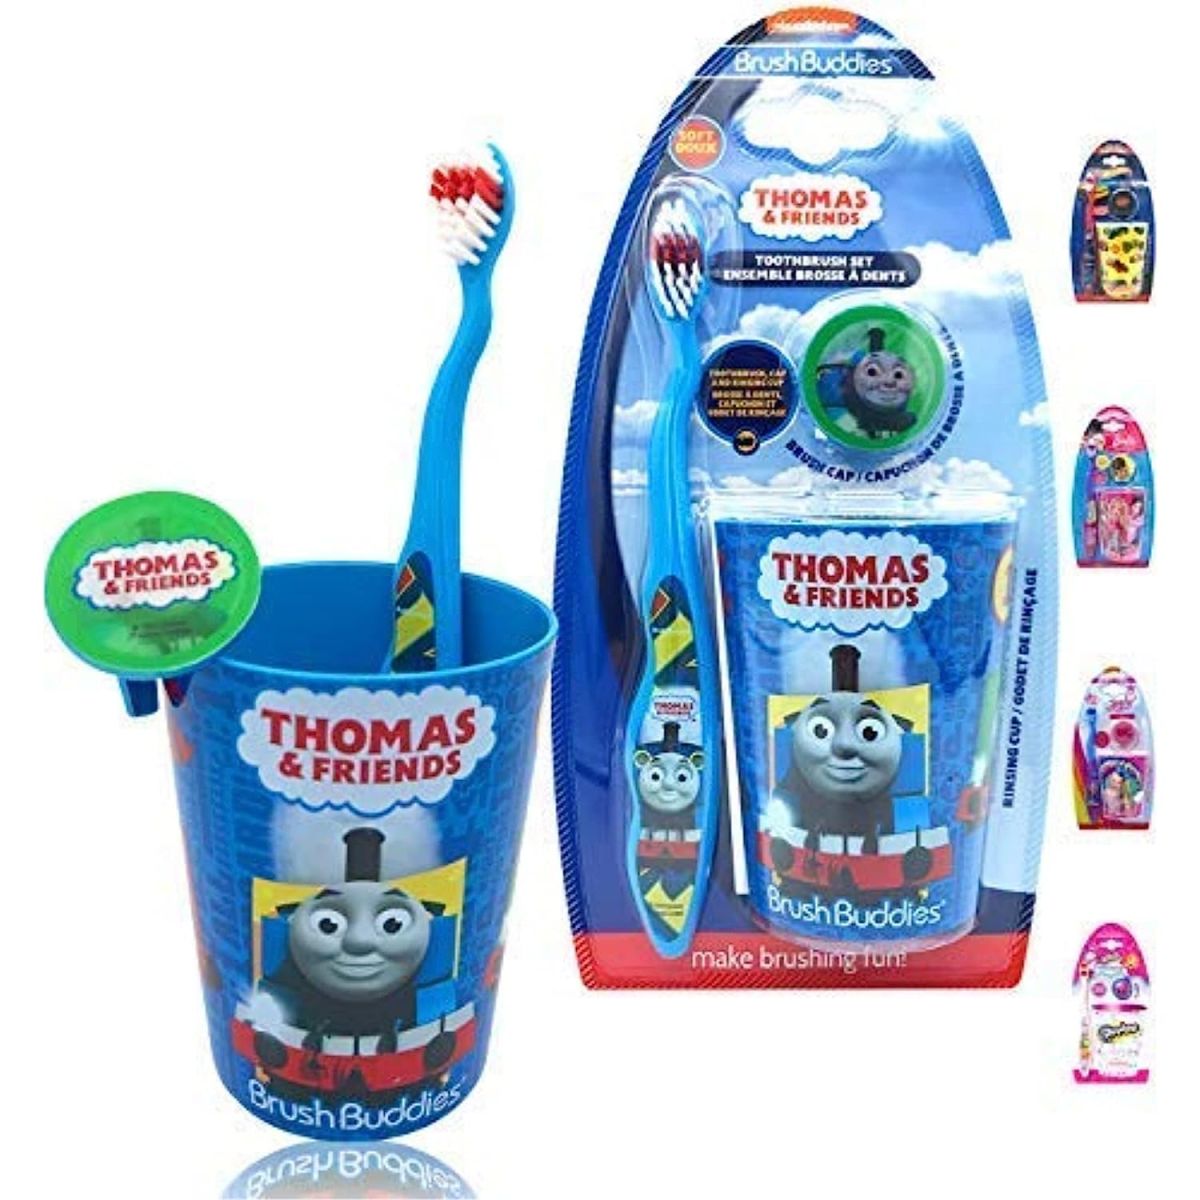 Thomas Premium Soft Bristle Toothbrush Set - Manual Toothbrush, Cover Cap, Rinsing Cup for Kids Girls Boys Children, Perfect for Birthday Gifts Goodies Favor